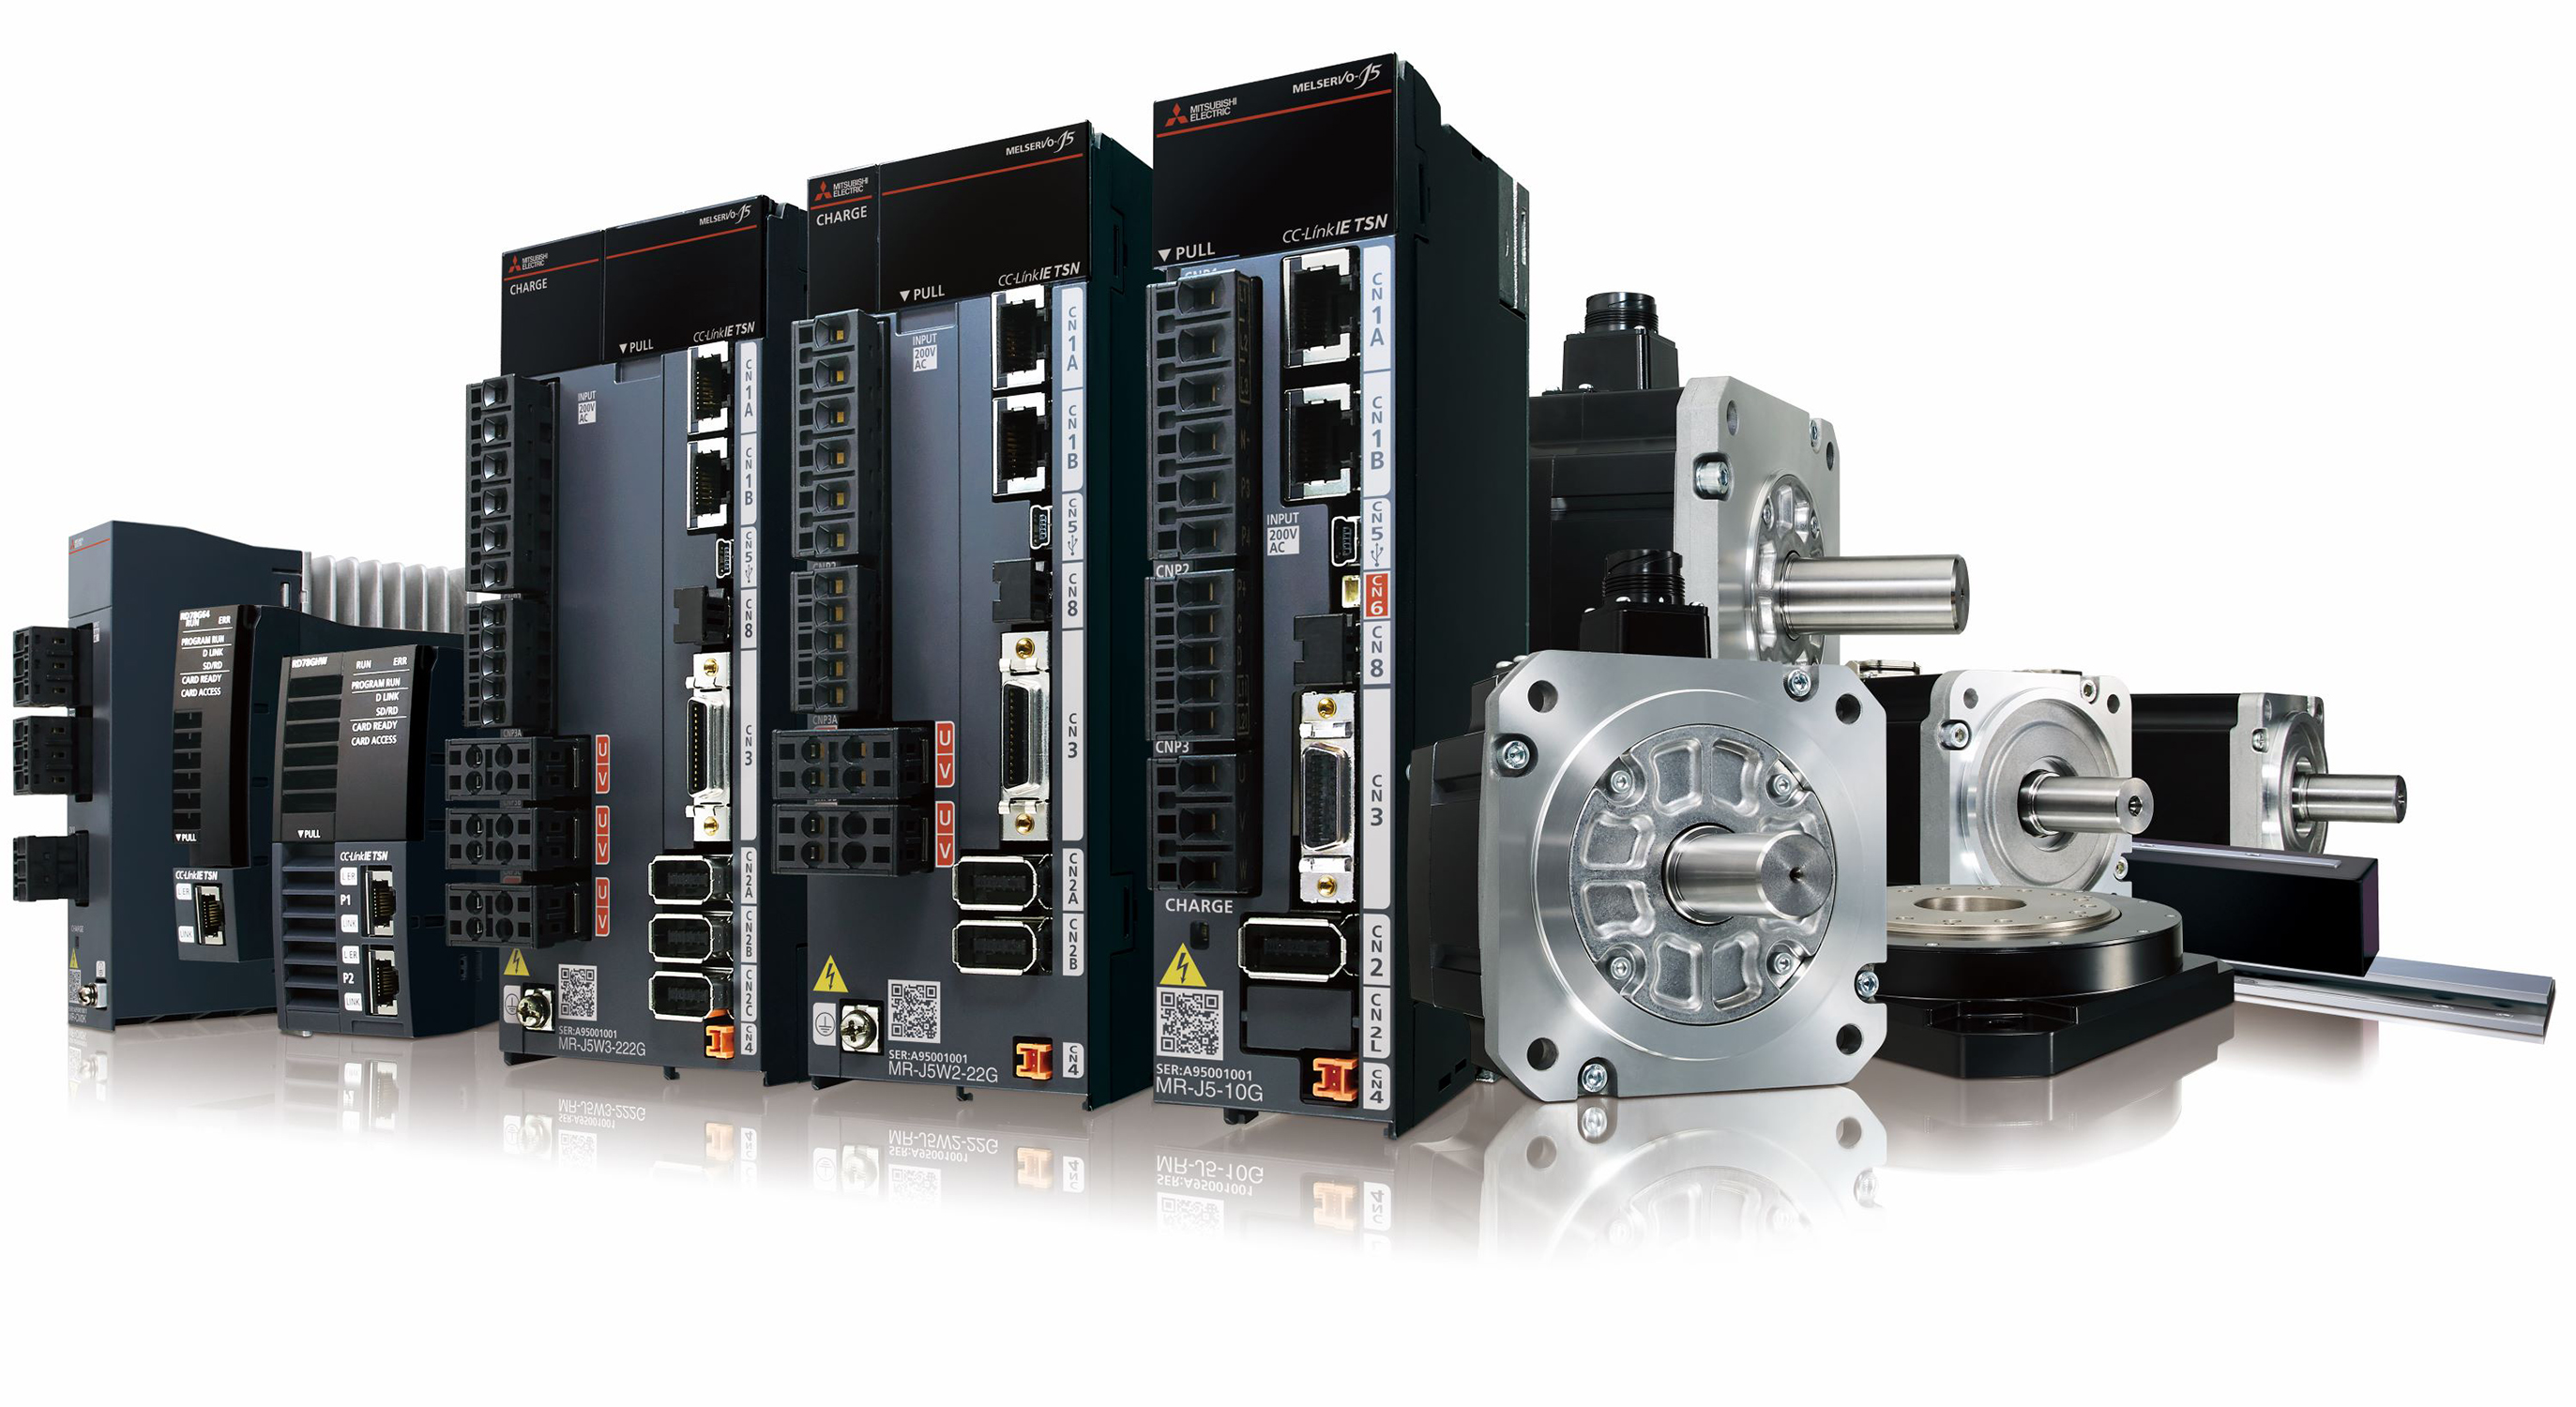 The latest Mitsubishi Electric MELSERVO MR-J5 series of TSN-compatible servo drives meet requirements for precision, dynamics and multi-axis synchronisation in applications such as food and beverage, life science and printing/converting applications.